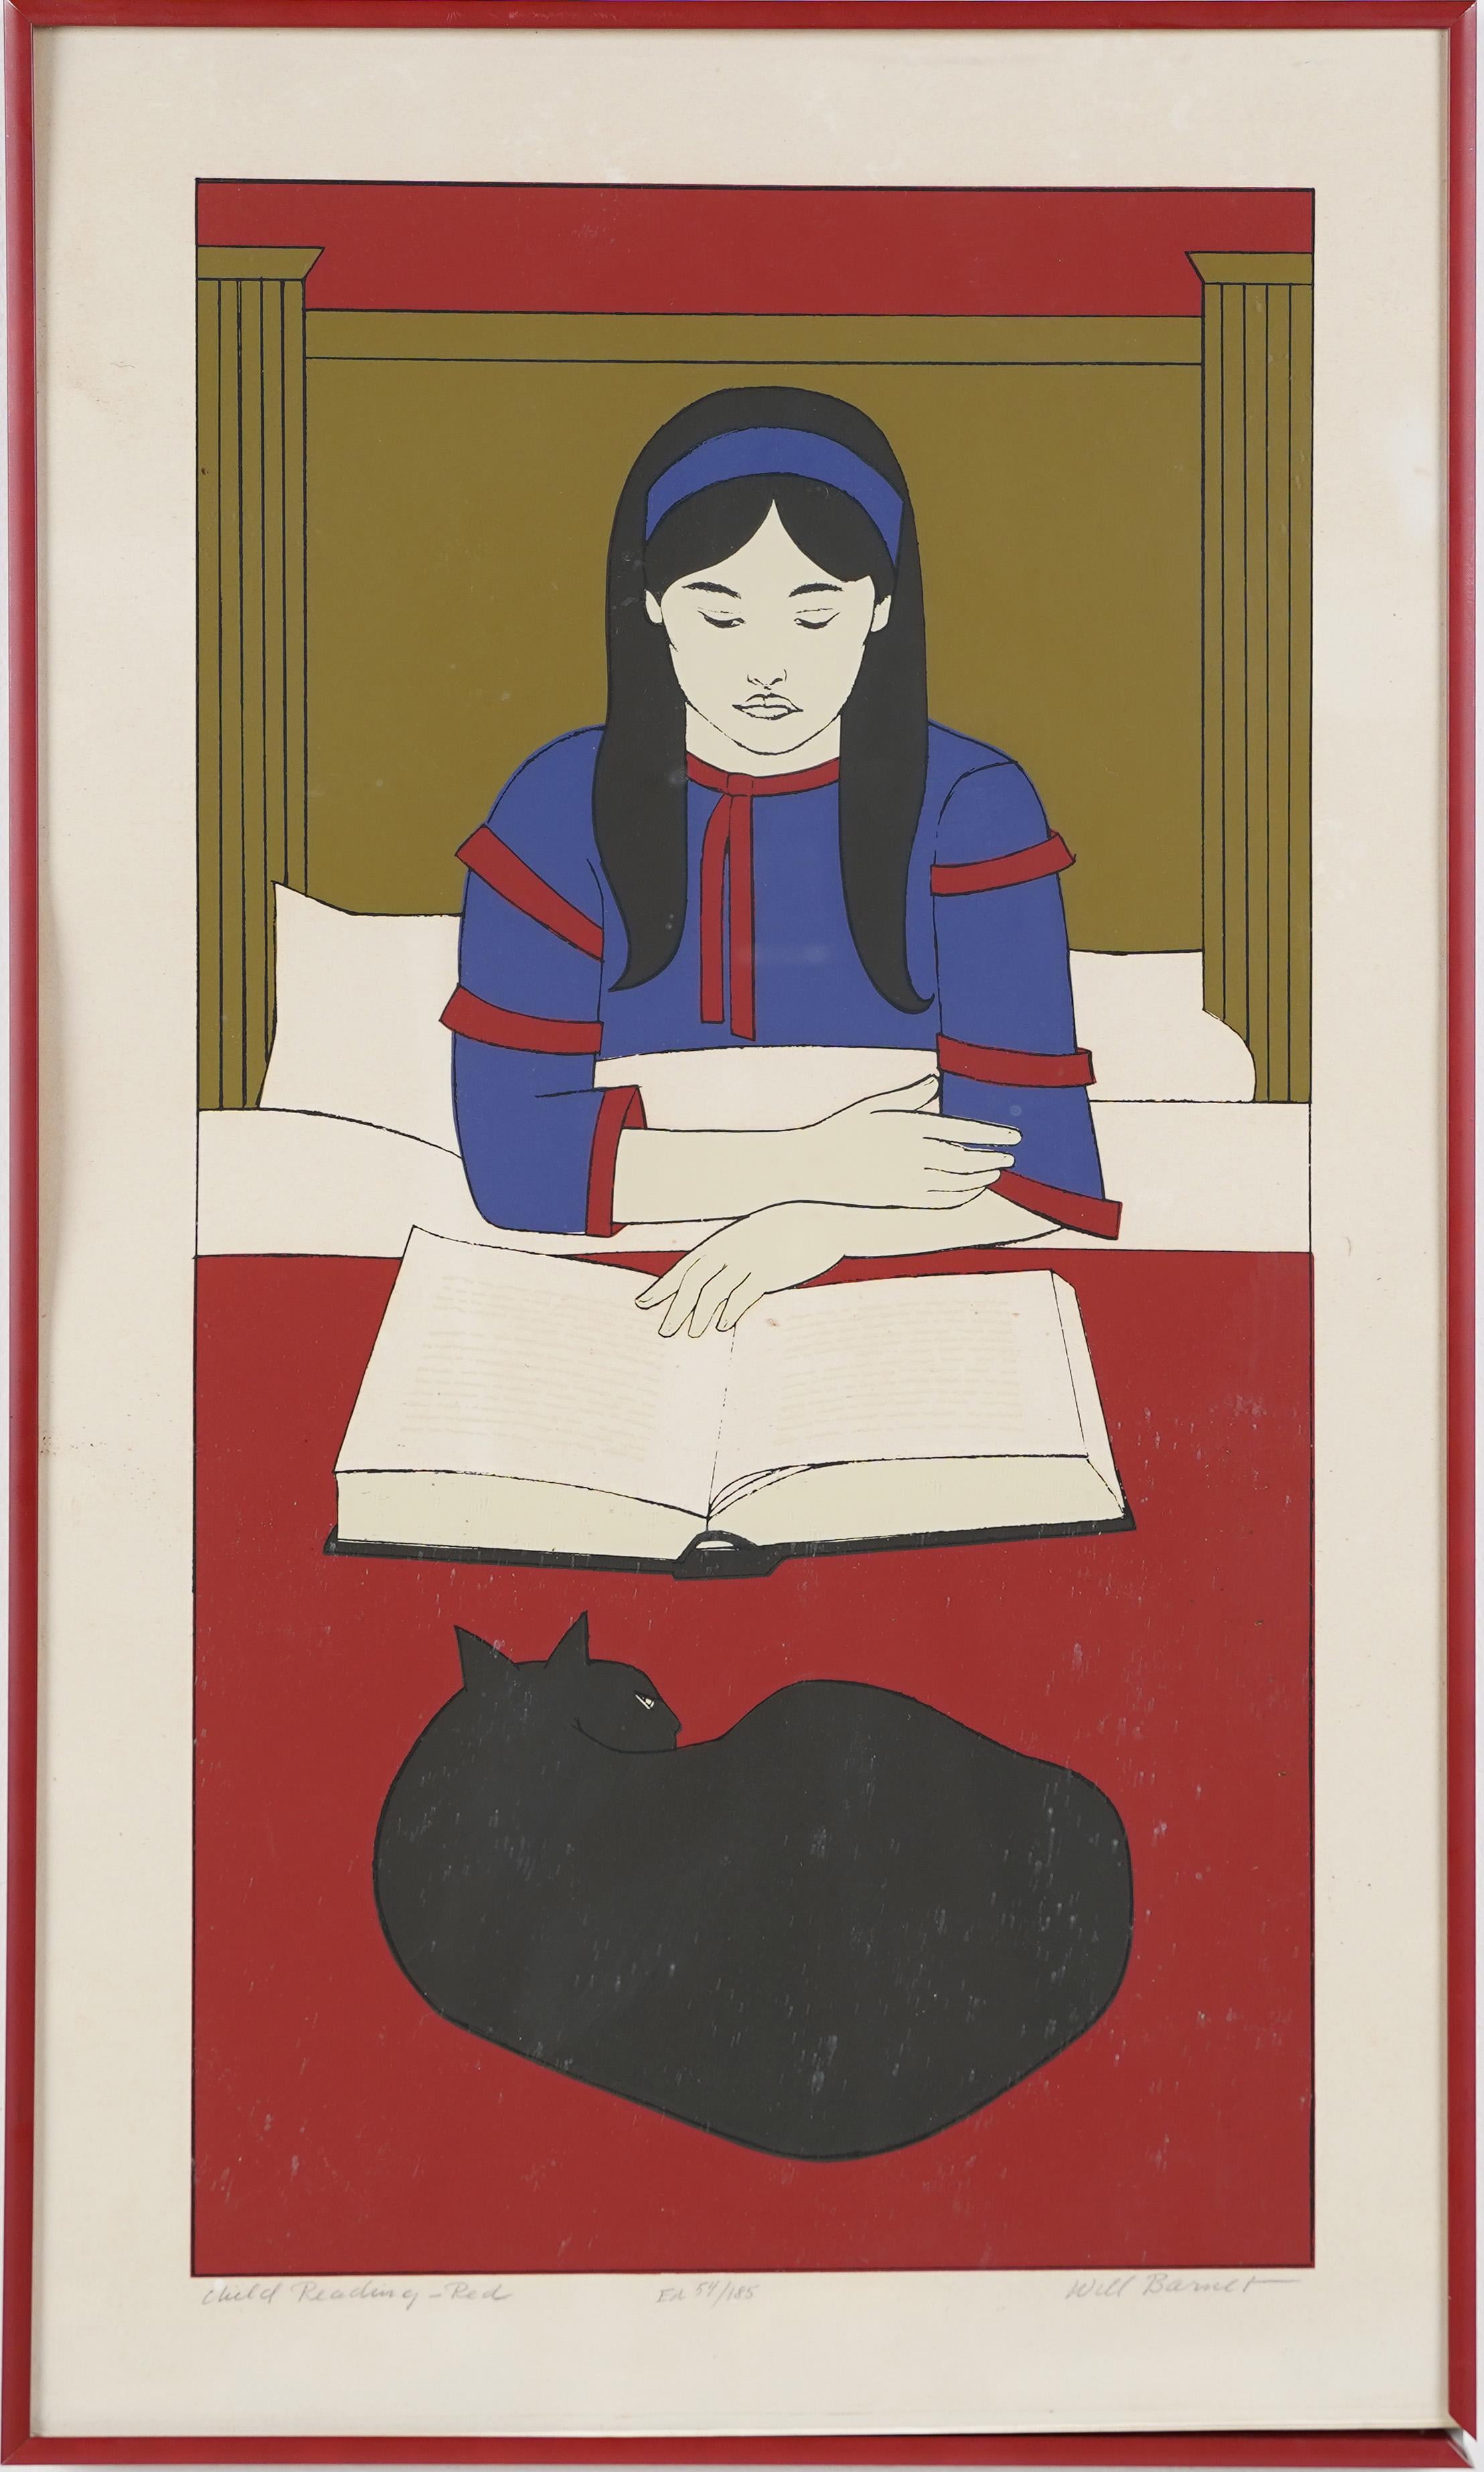 Will Barnet Animal Print - Vintage Signed and Numbered Limited Edition Serigraph "Child Reading"